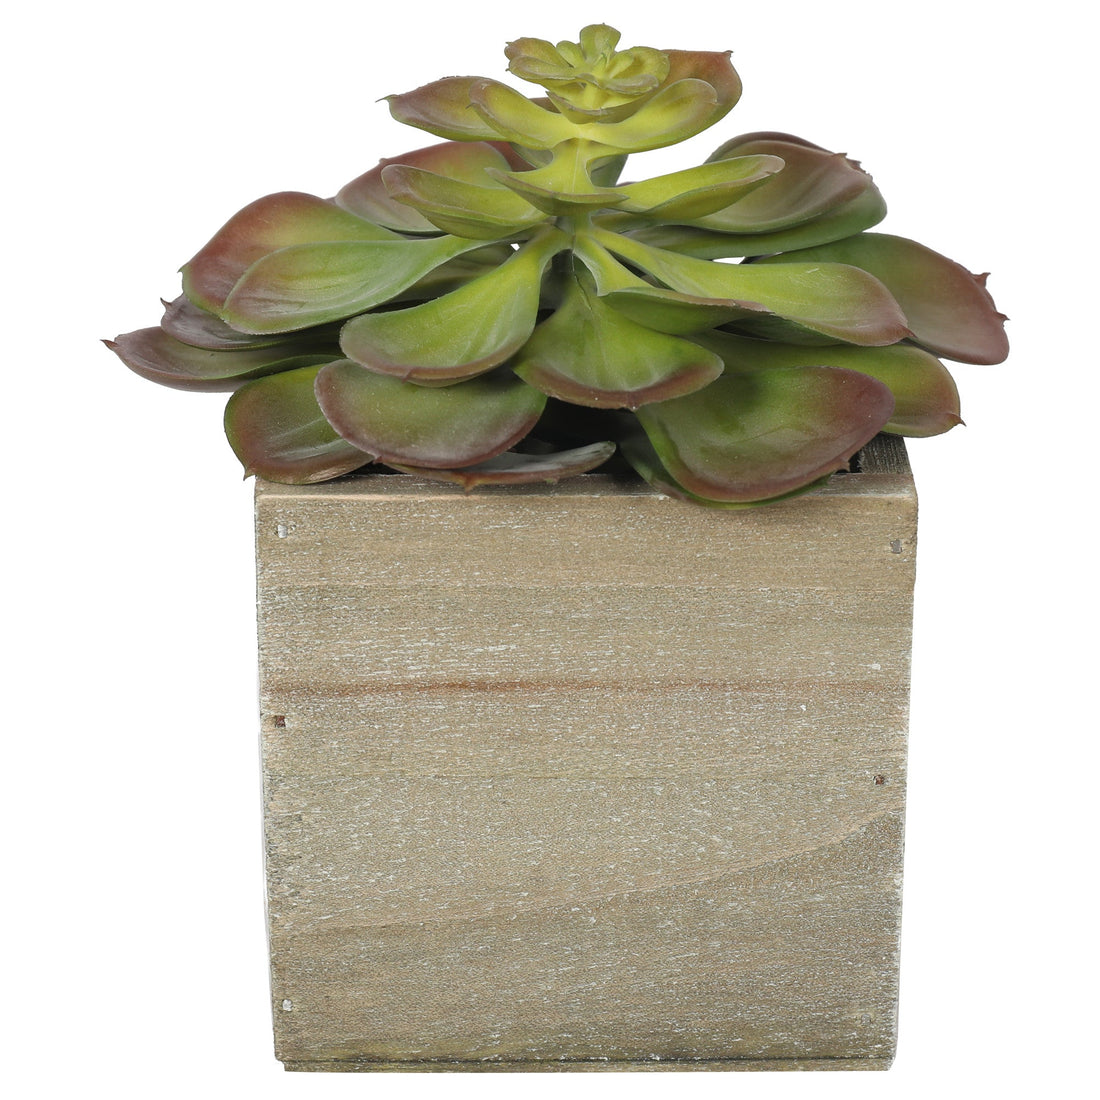 Artificial Potted Succulent Plants 16CM Indoo (6536501133408)